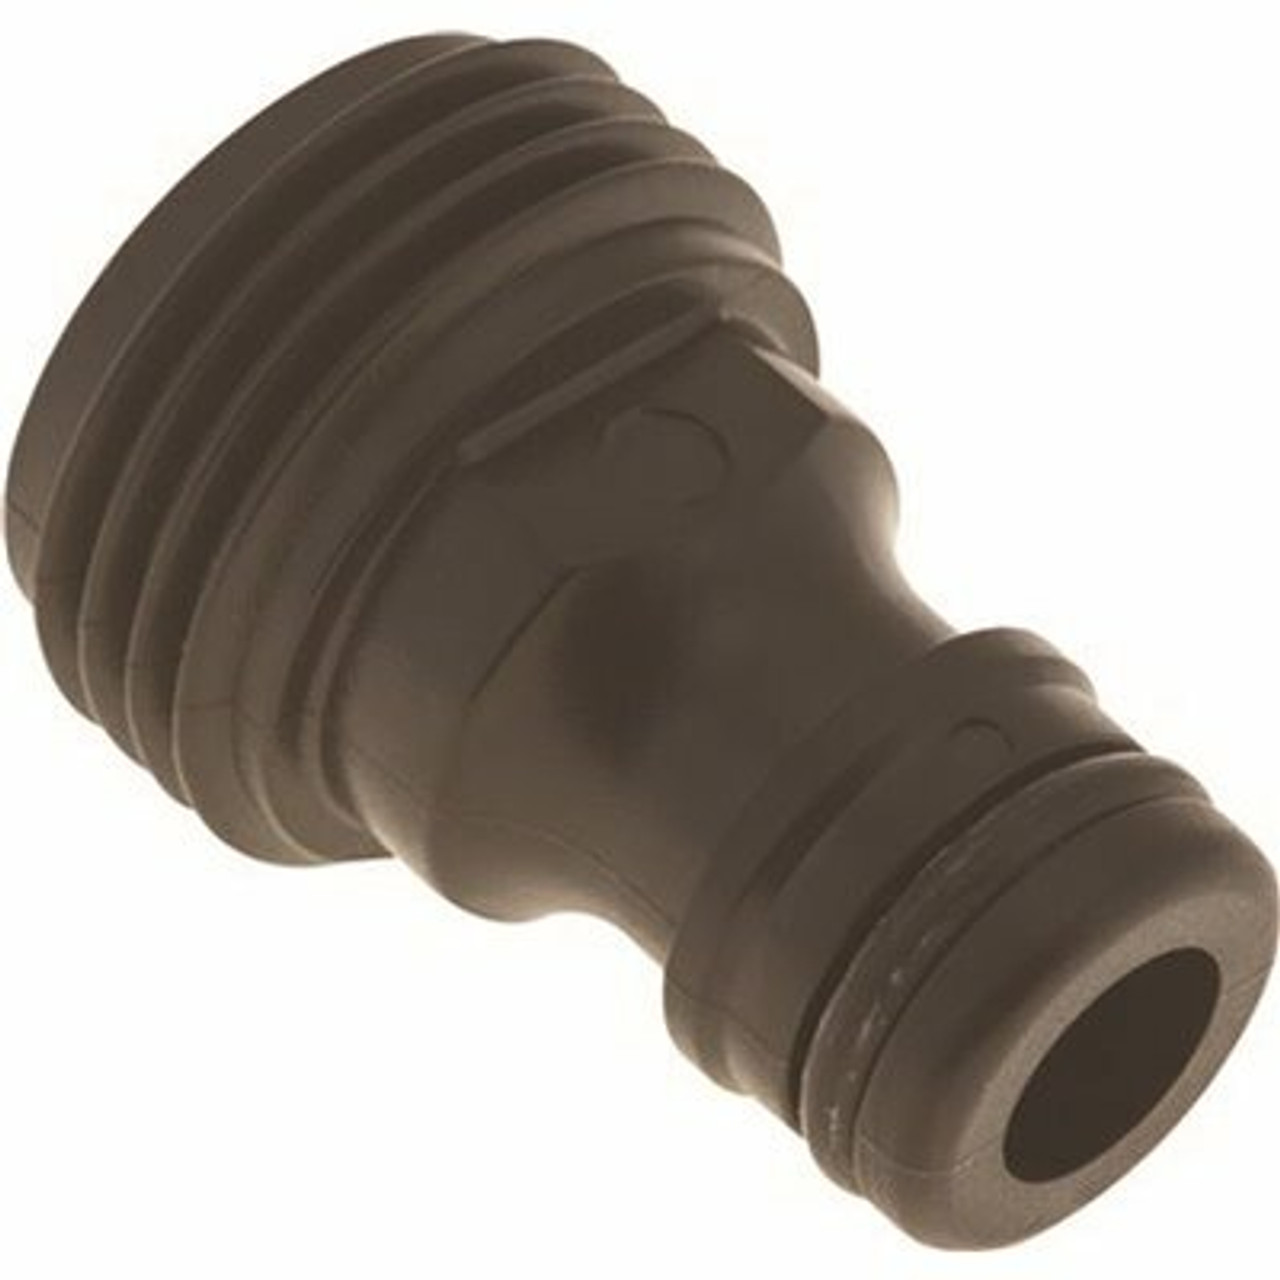 Melnor Male Quick Connect Adapter